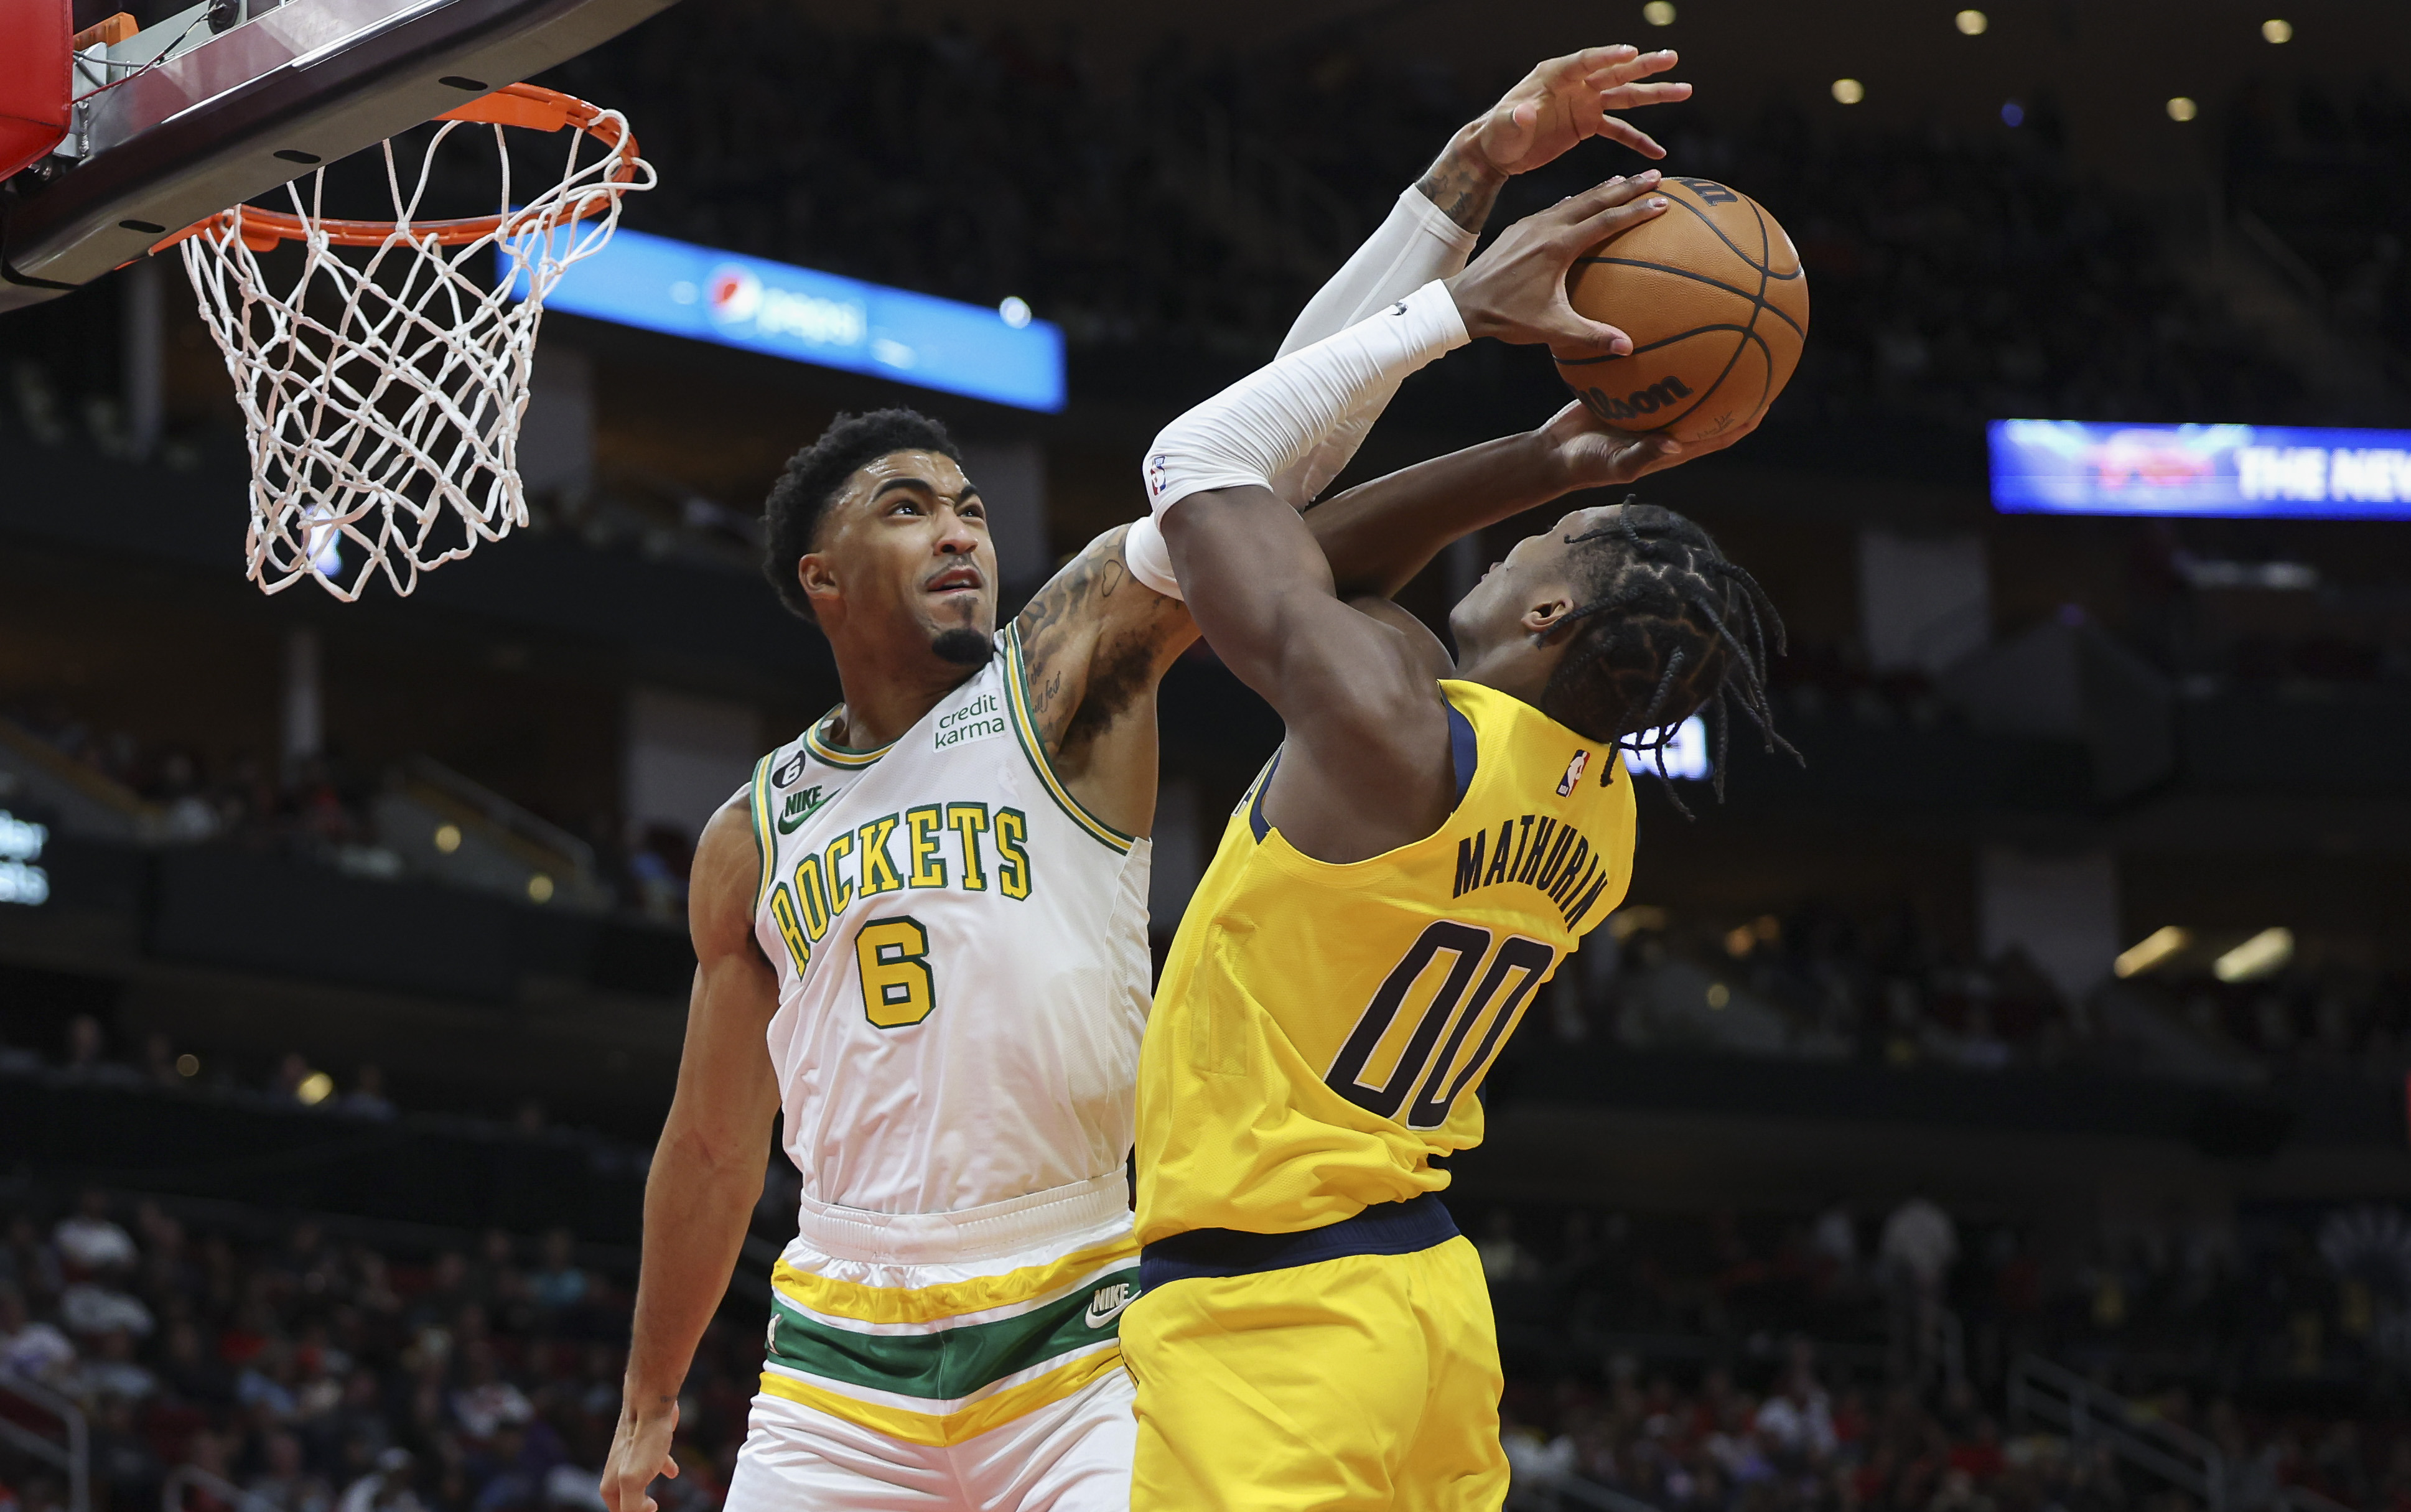 Indiana Pacers overcome 20-point deficit to beat Rockets in Houston